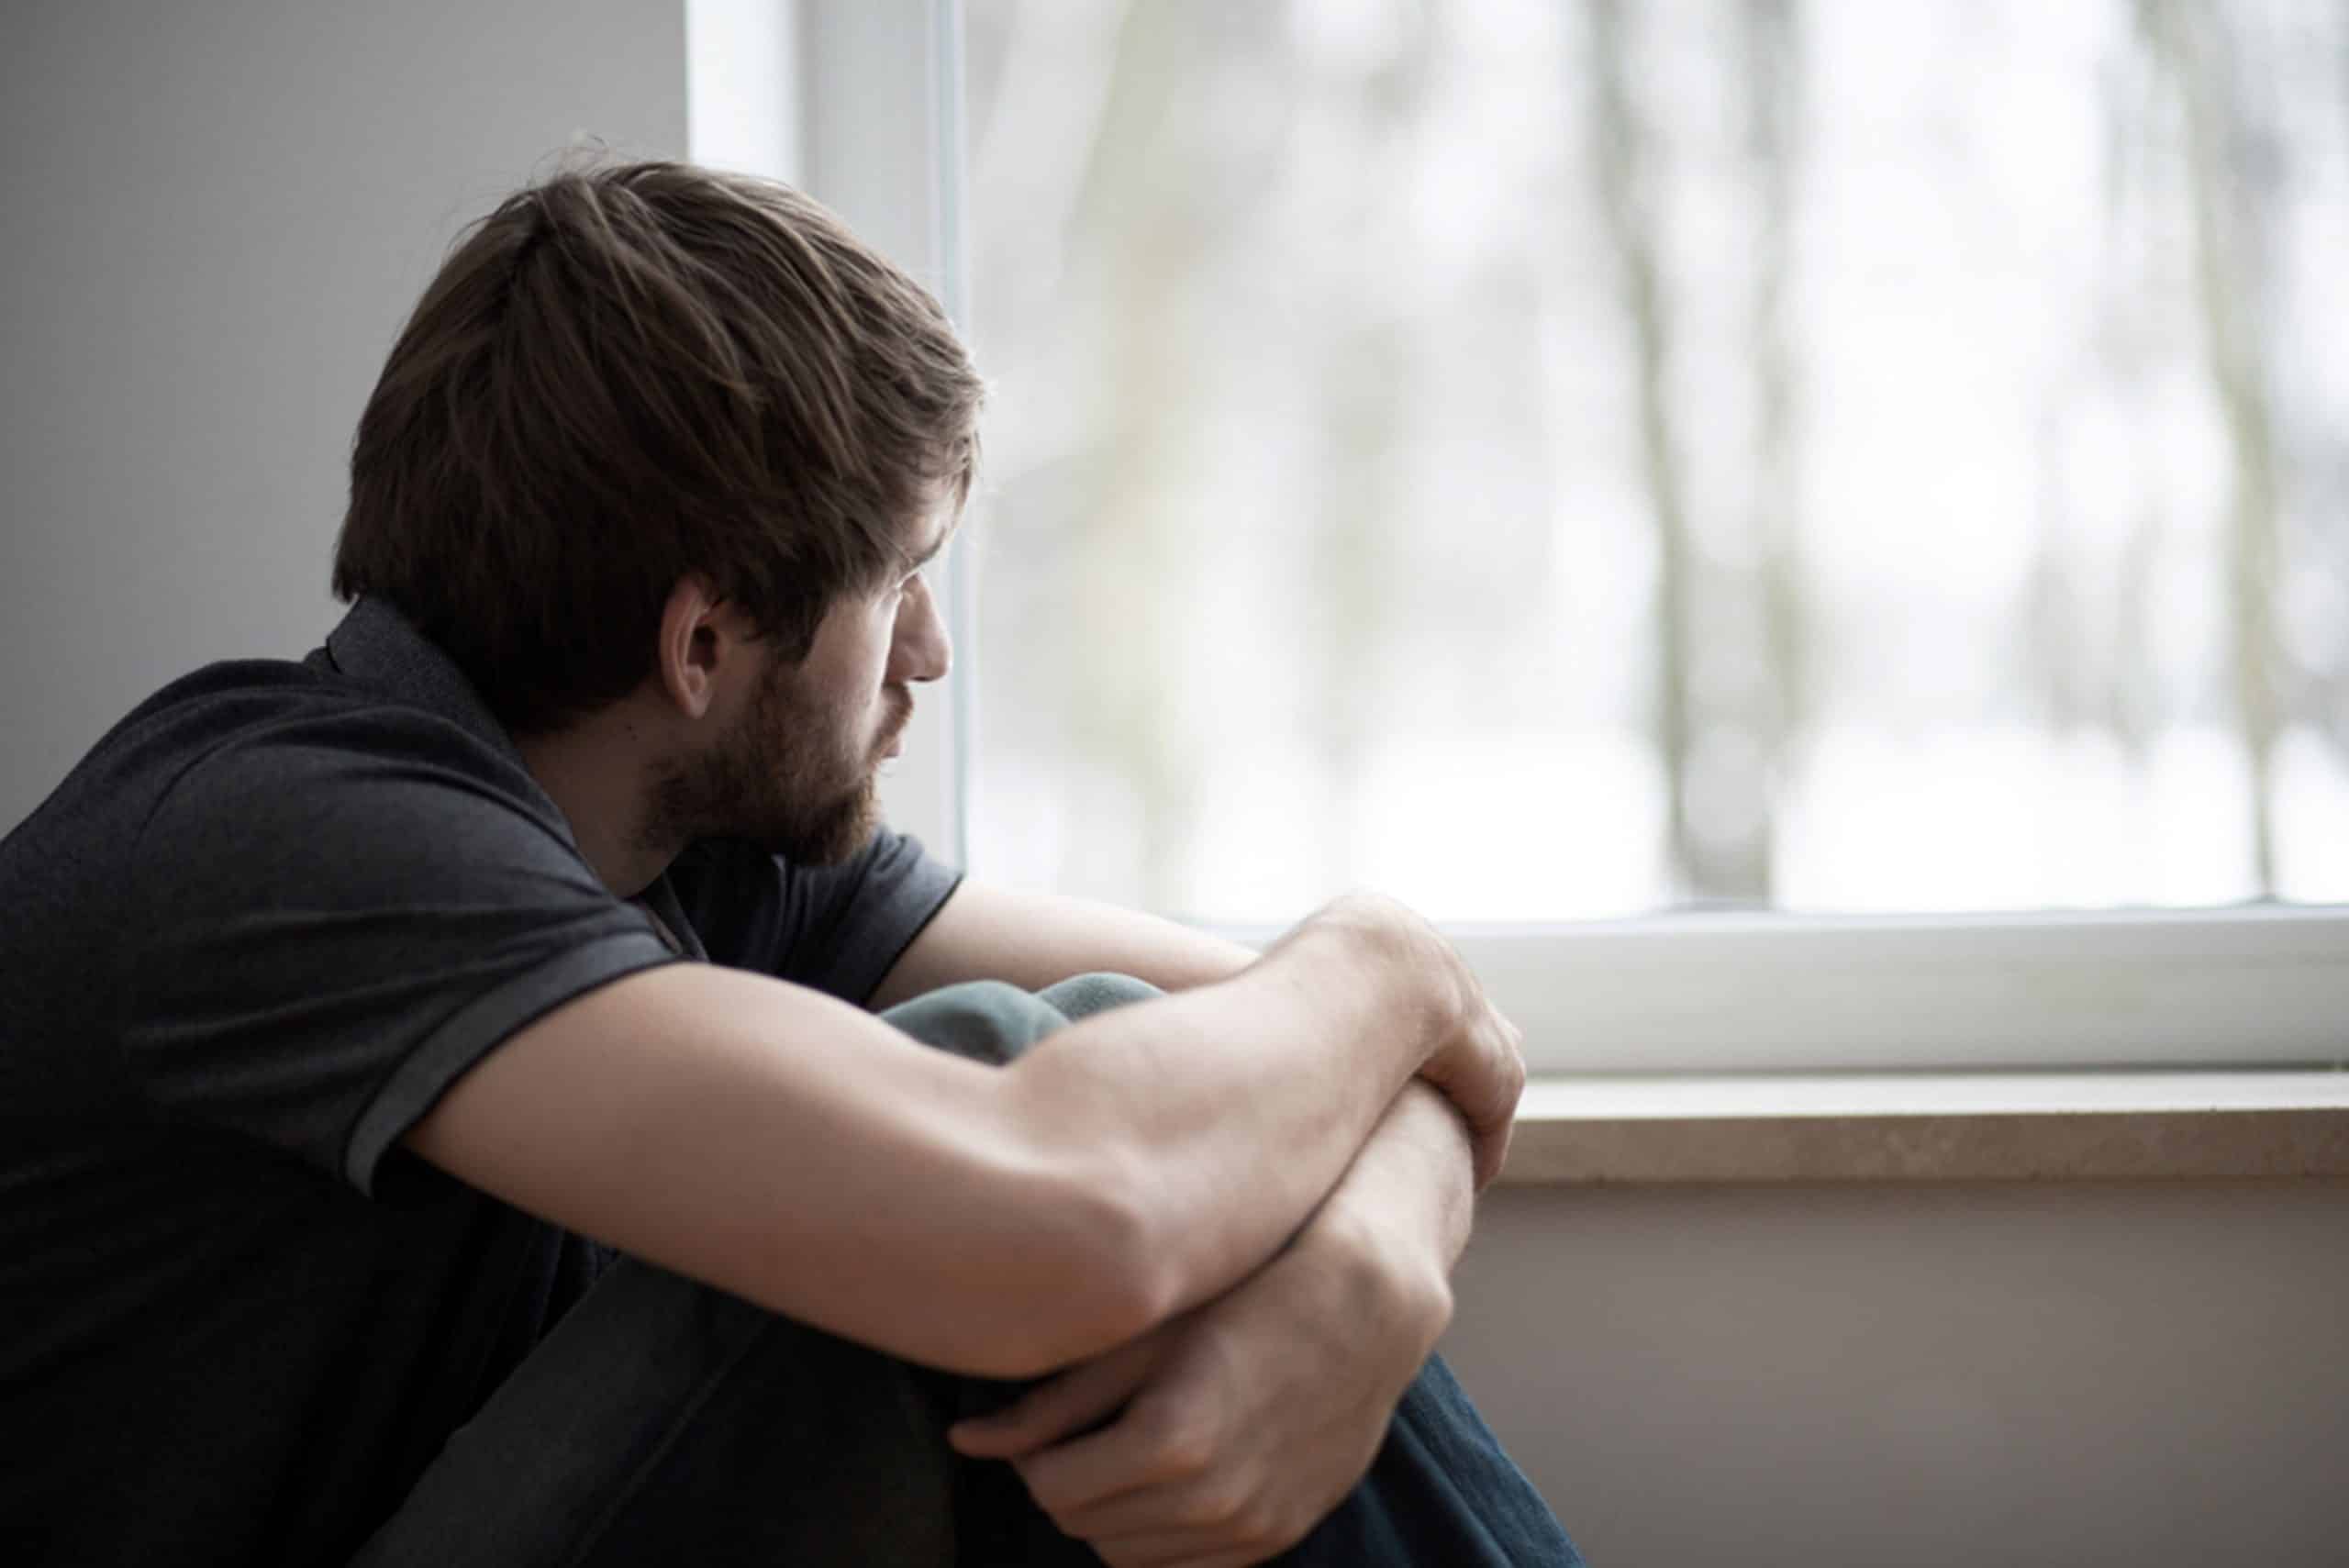 Sad young man sitting on the floor with his arms around his knees looking out the window.